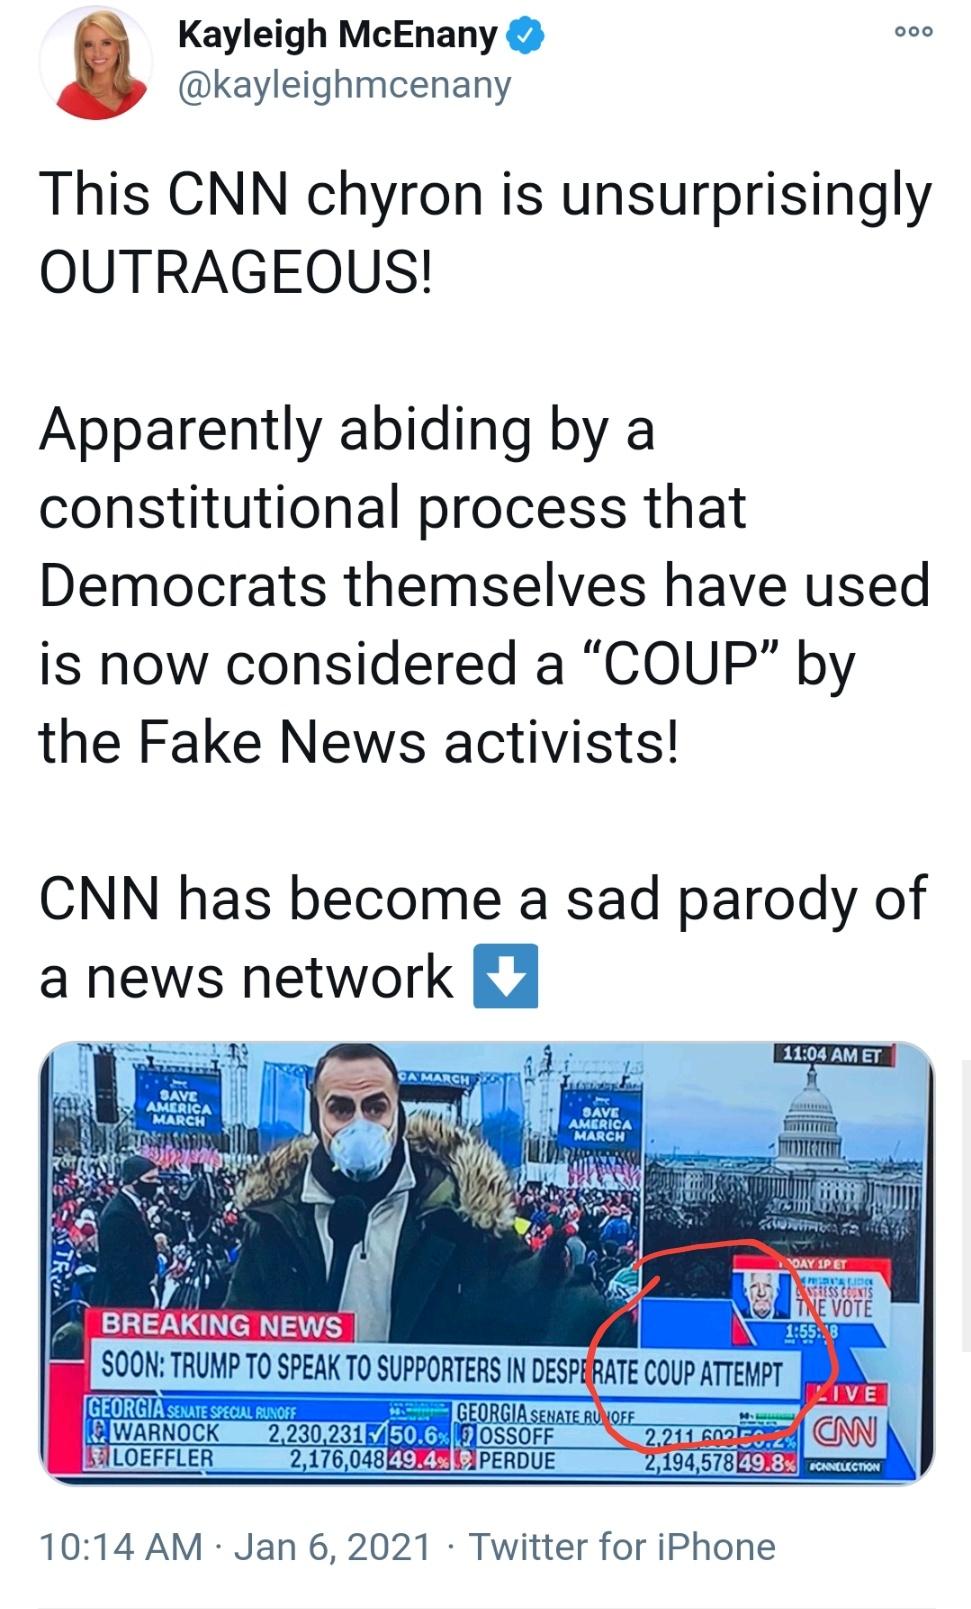 water - Ooo Kayleigh McEnany This Cnn chyron is unsurprisingly Outrageous! Apparently abiding by a constitutional process that Democrats themselves have used is now considered a "Coup" by the Fake News activists! Cnn has become a sad parody of a news netw